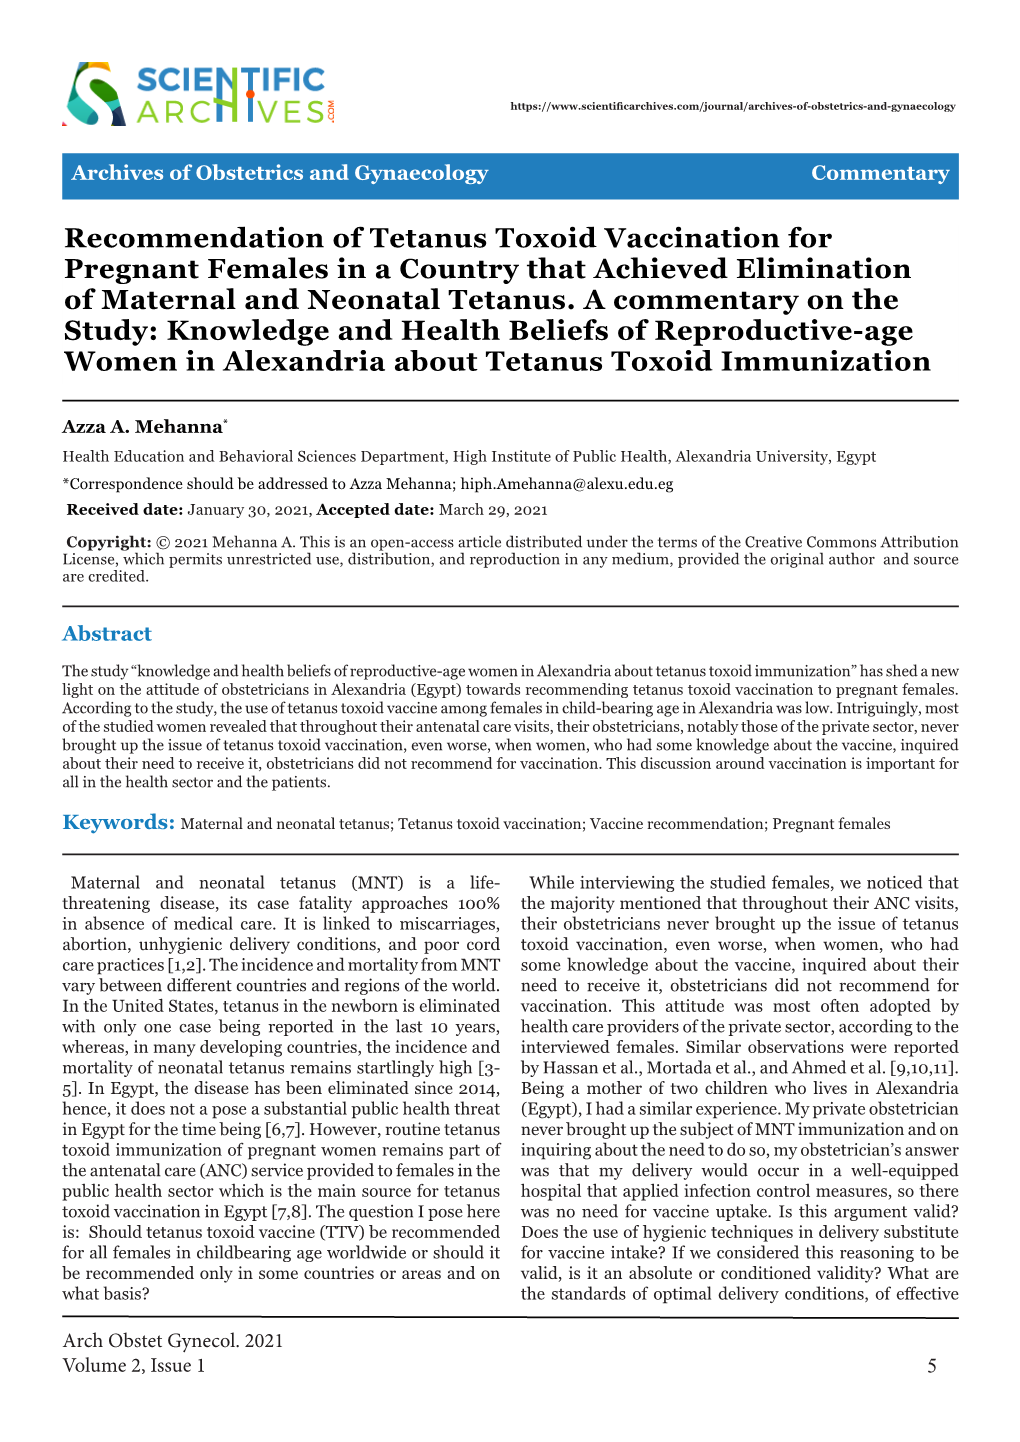 Recommendation of Tetanus Toxoid Vaccination for Pregnant Females in a Country That Achieved Elimination of Maternal and Neonatal Tetanus